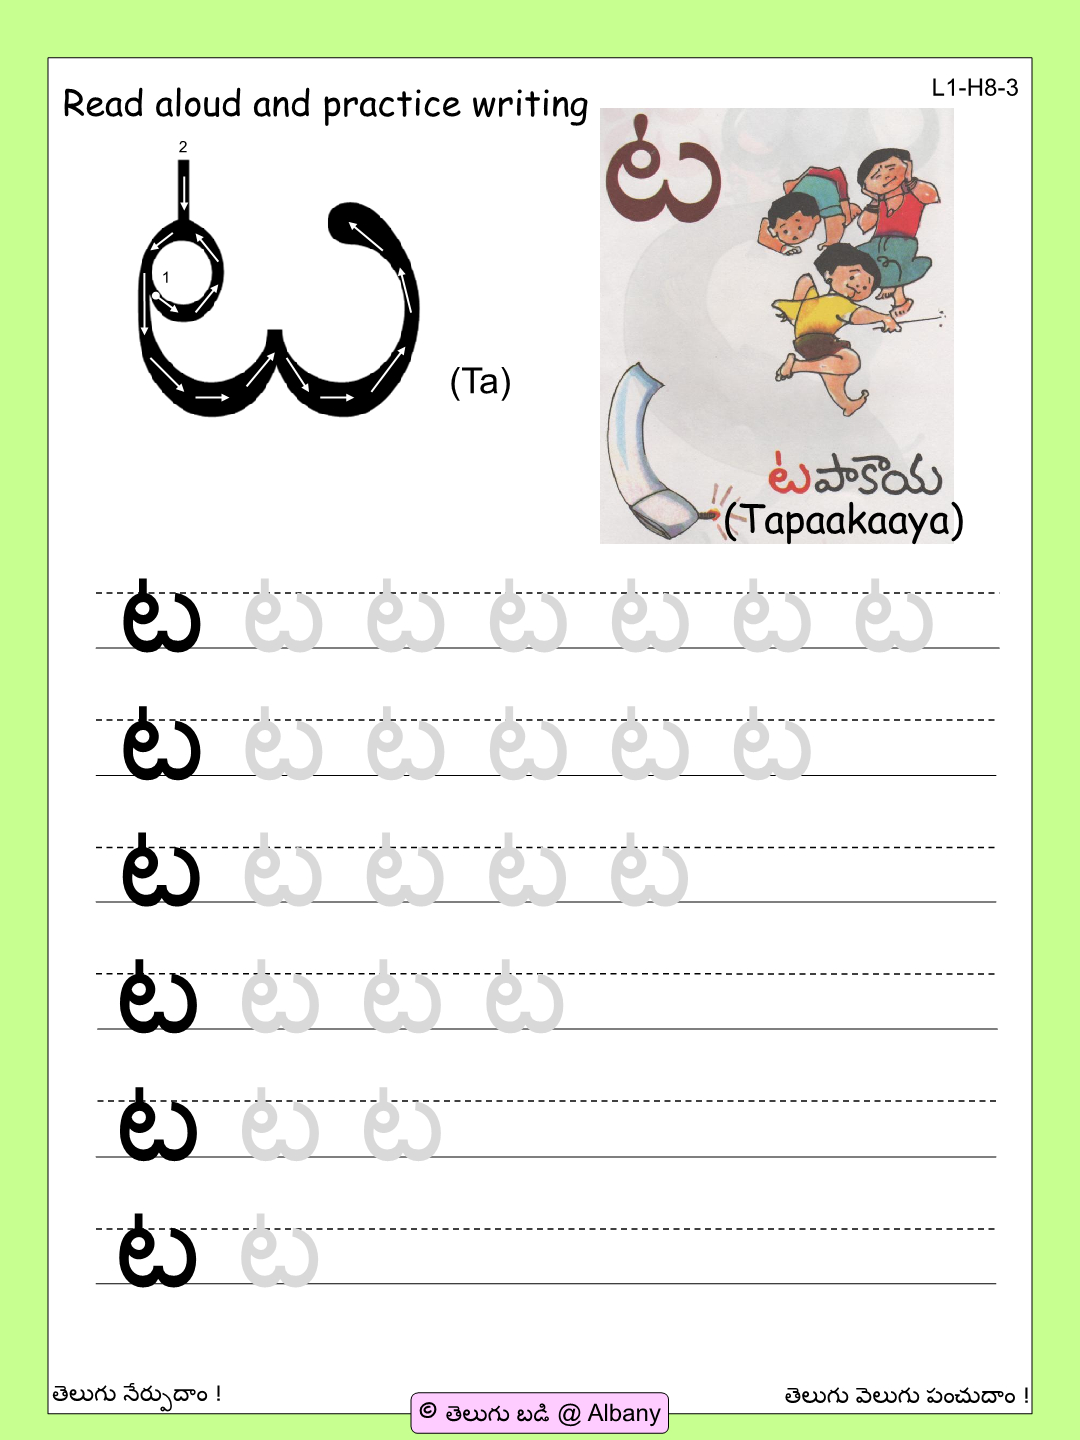 Telugu Picture Reading Video Lesson &amp;quot;aata (ఆట)&amp;quot; with regard to Telugu Letters Tracing